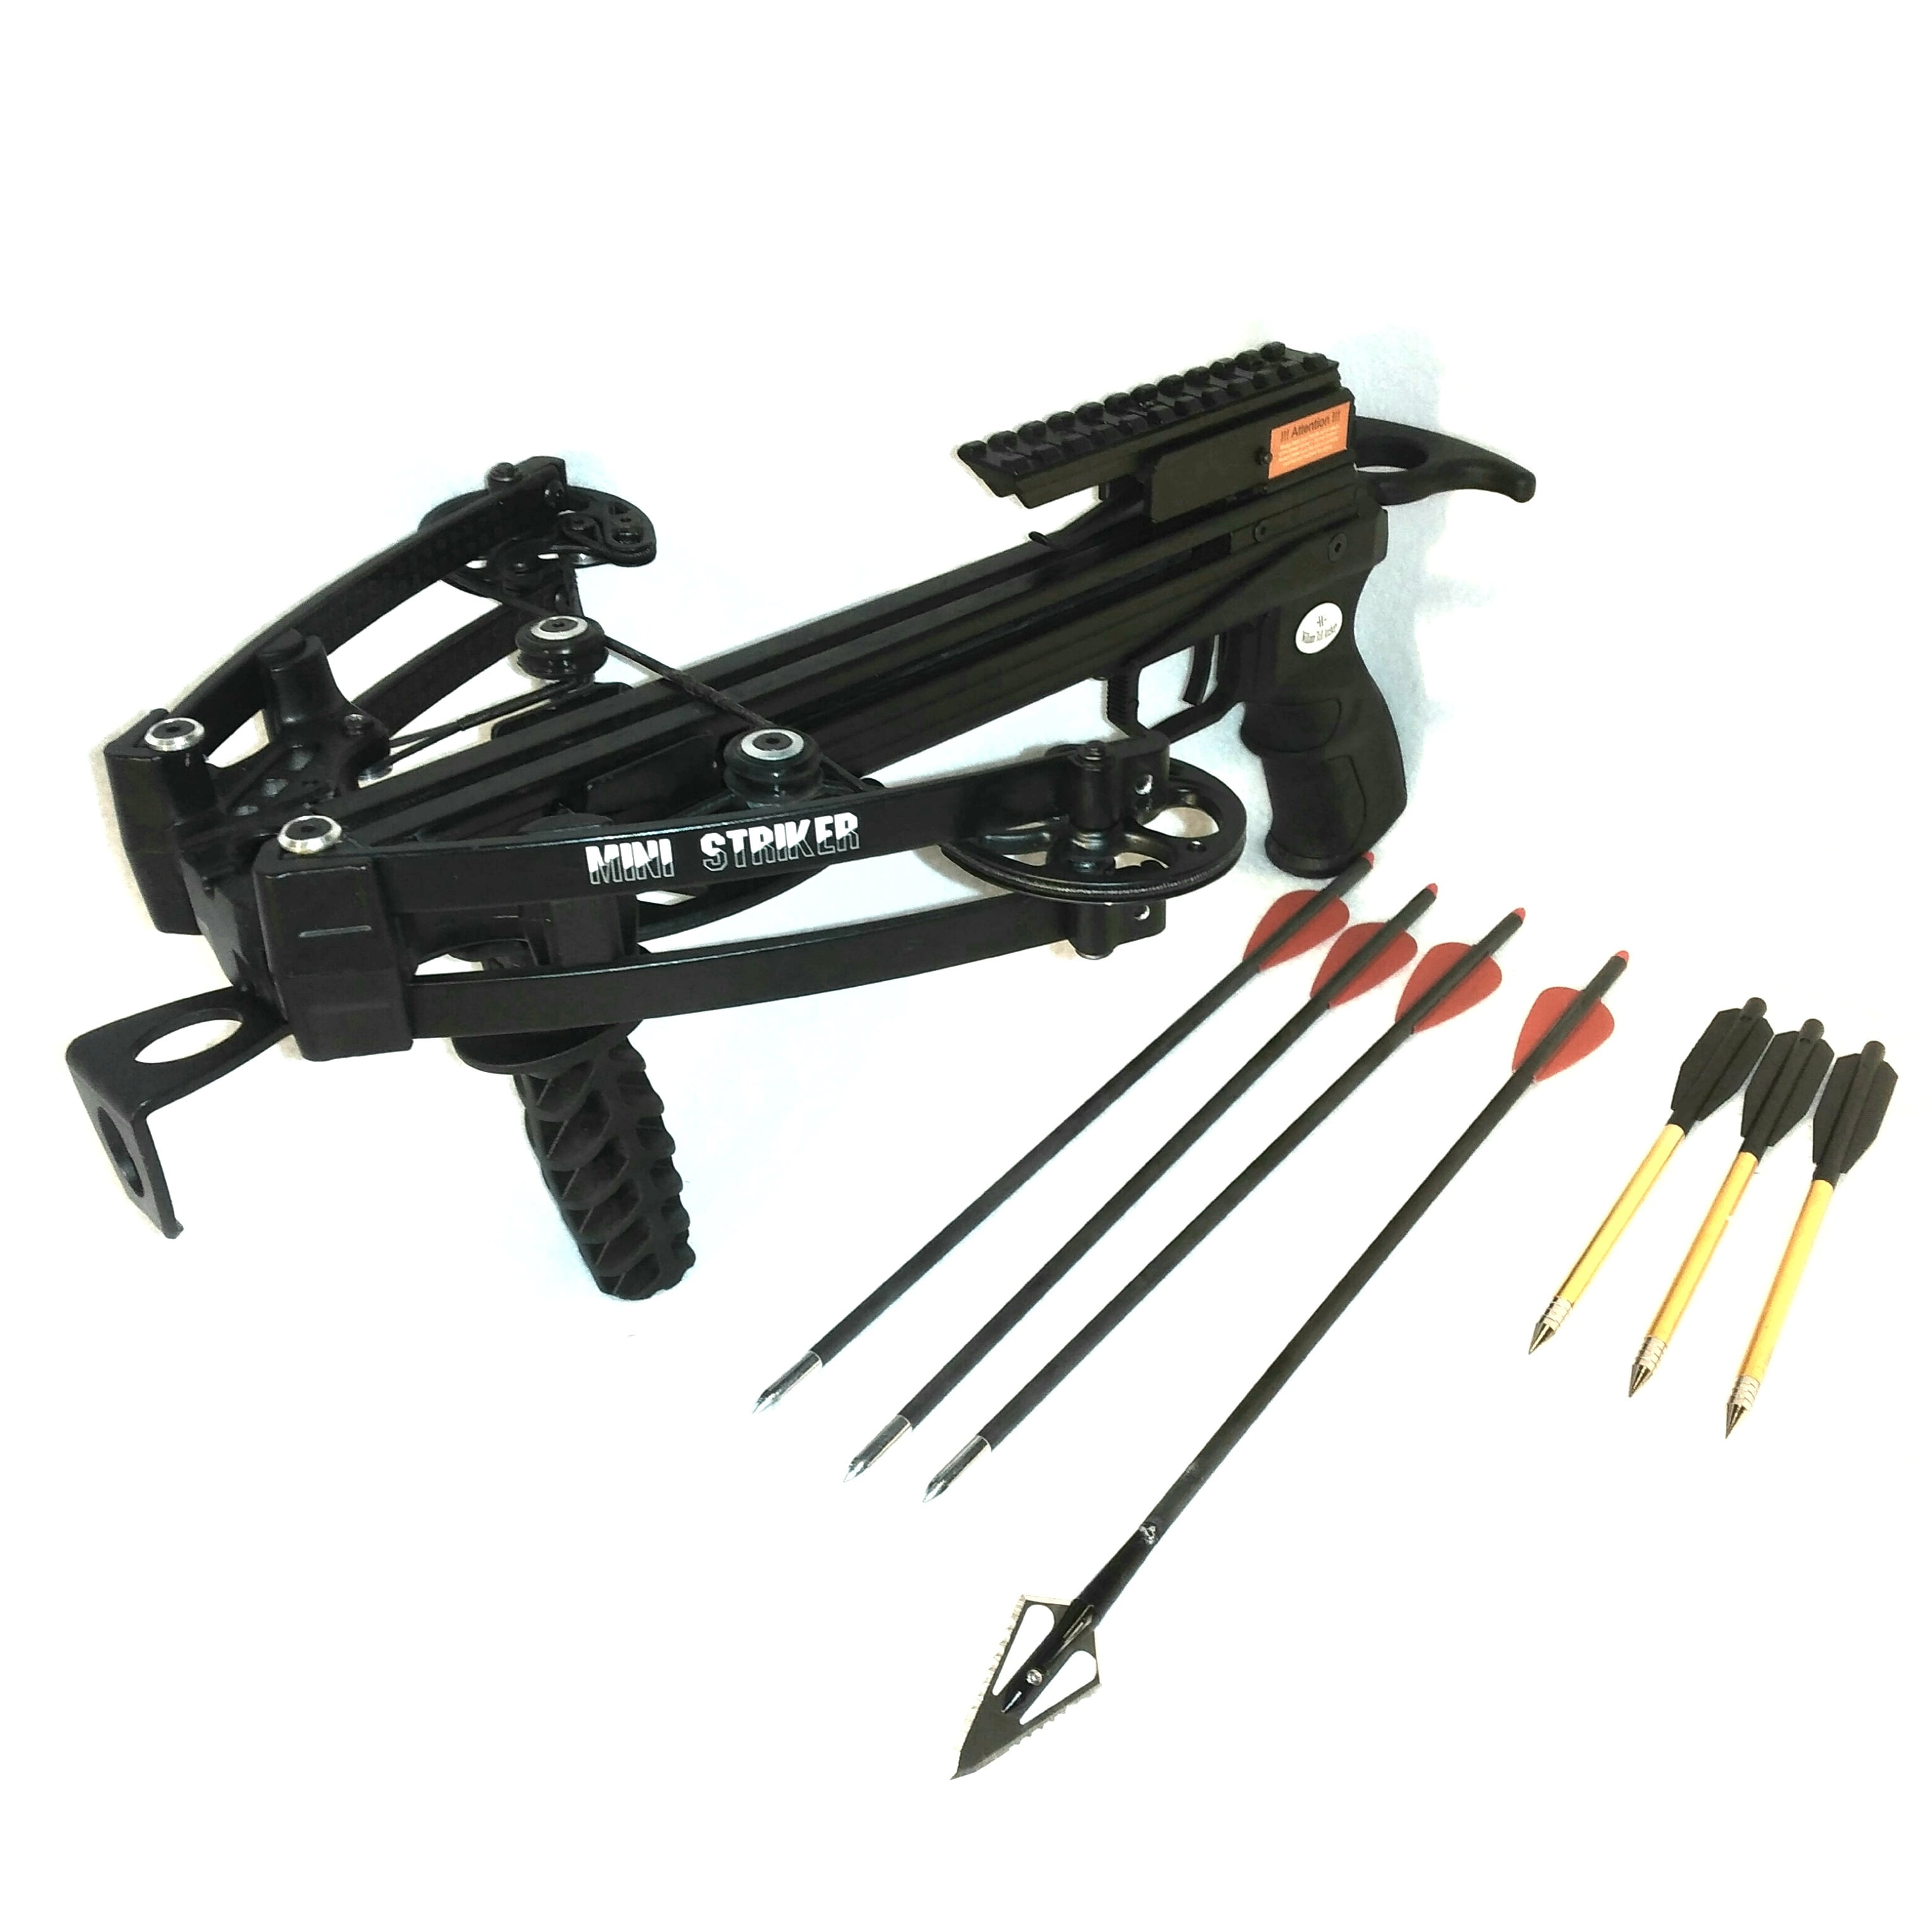 High Quality Mini Handheld Arrow Launcher Self Defense Crossbow Outdoor Hunting 